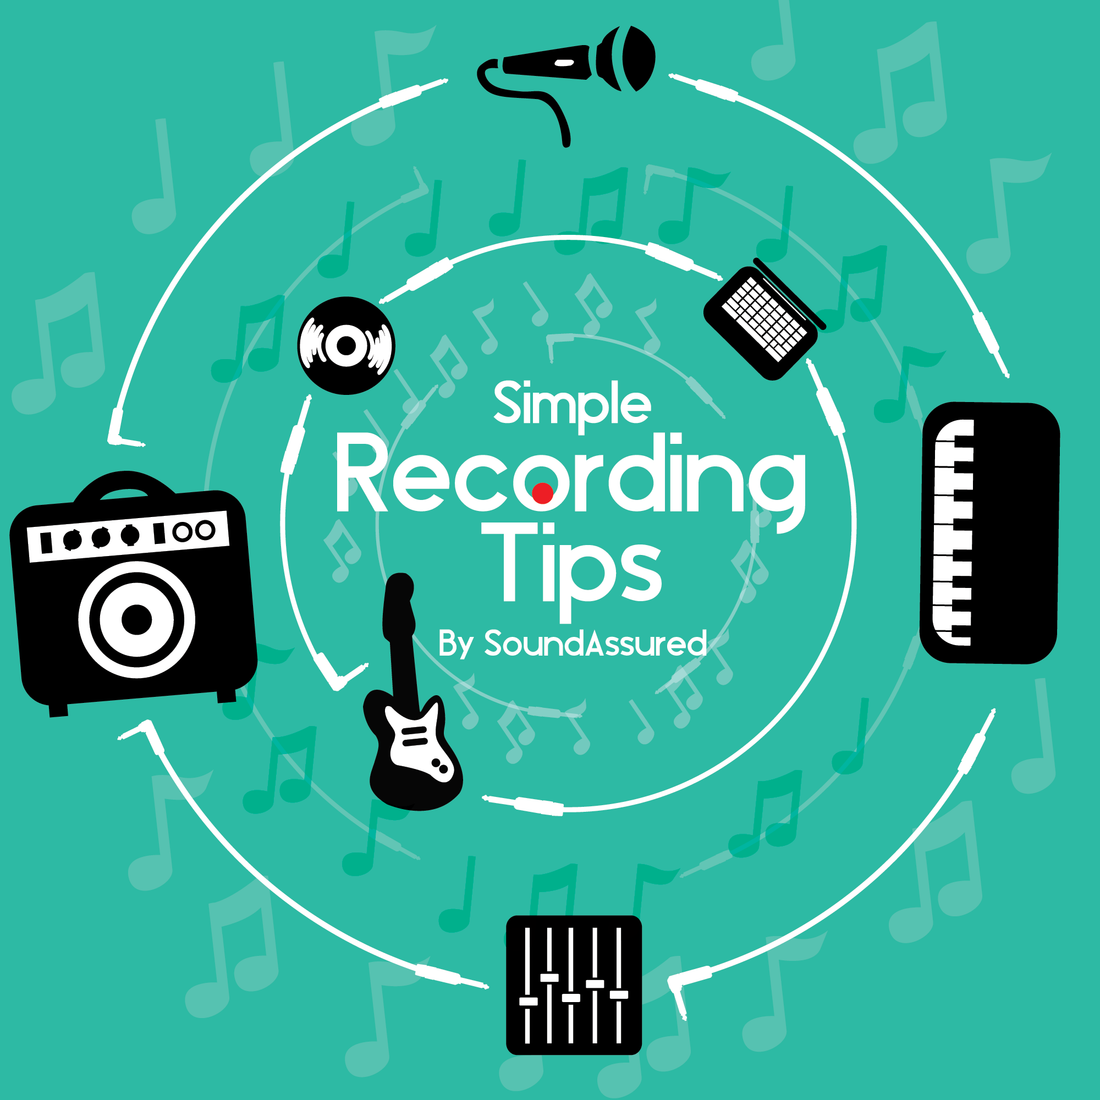 What Is A Condenser Microphone & How Does It Work? - Simple Recording Tip